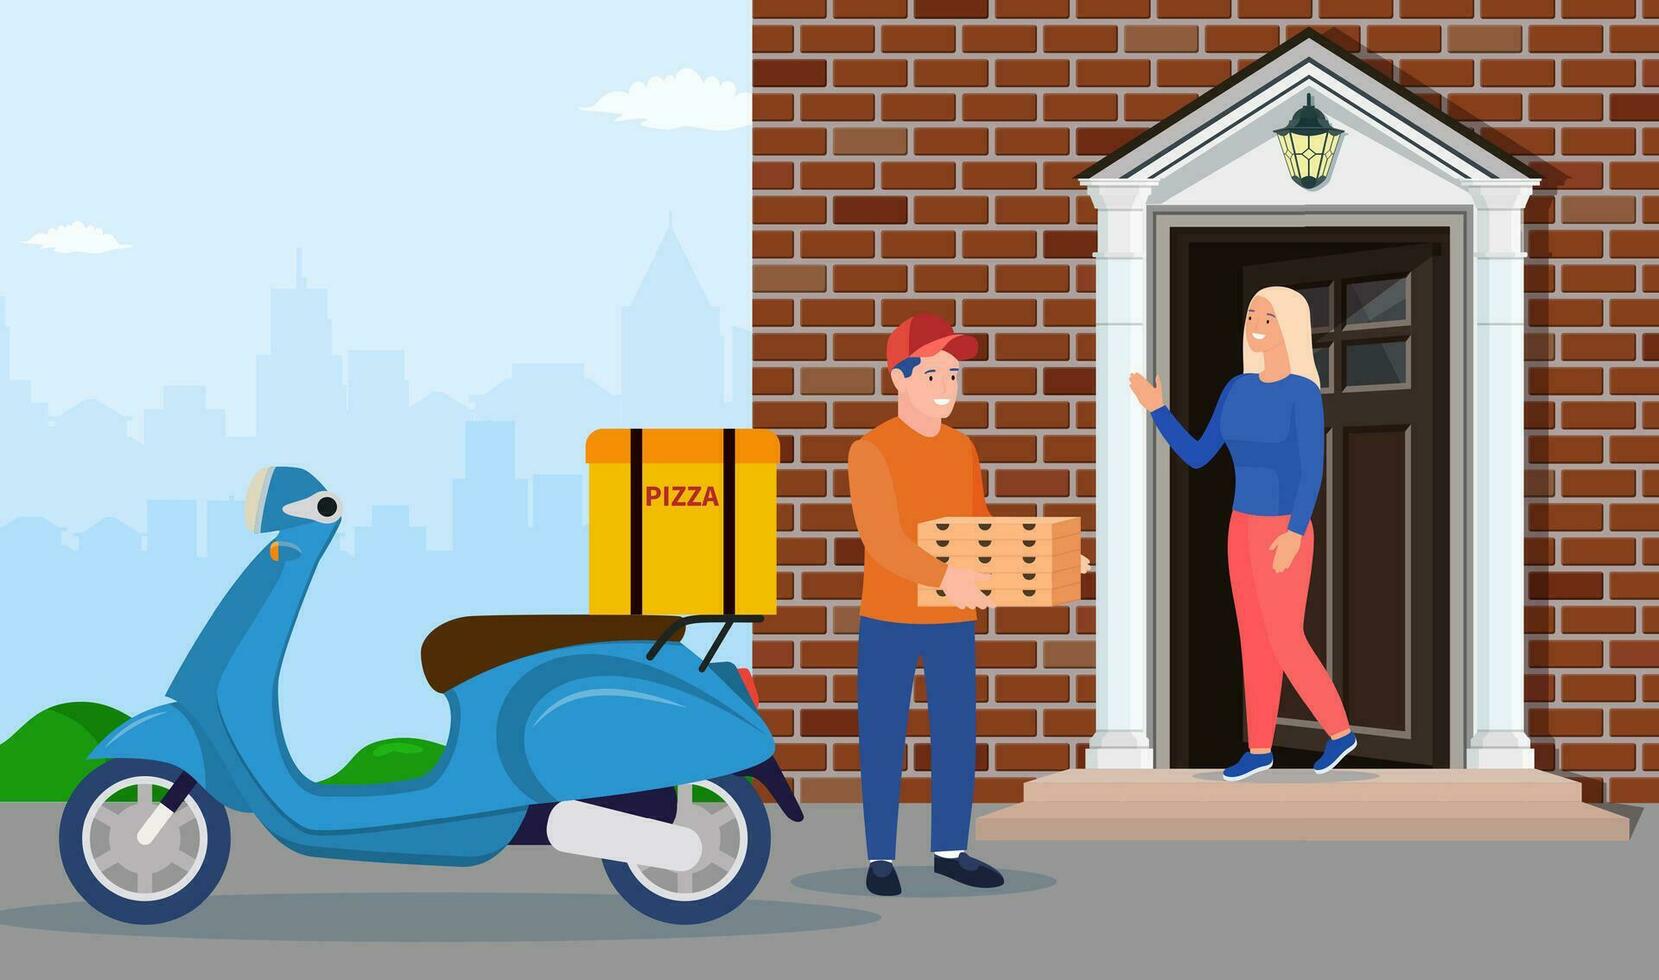 delivery man bringing a pile of pizza boxes near house facade. Courier character holds pizza. Free and fast shipping. Vector illustration in flat style